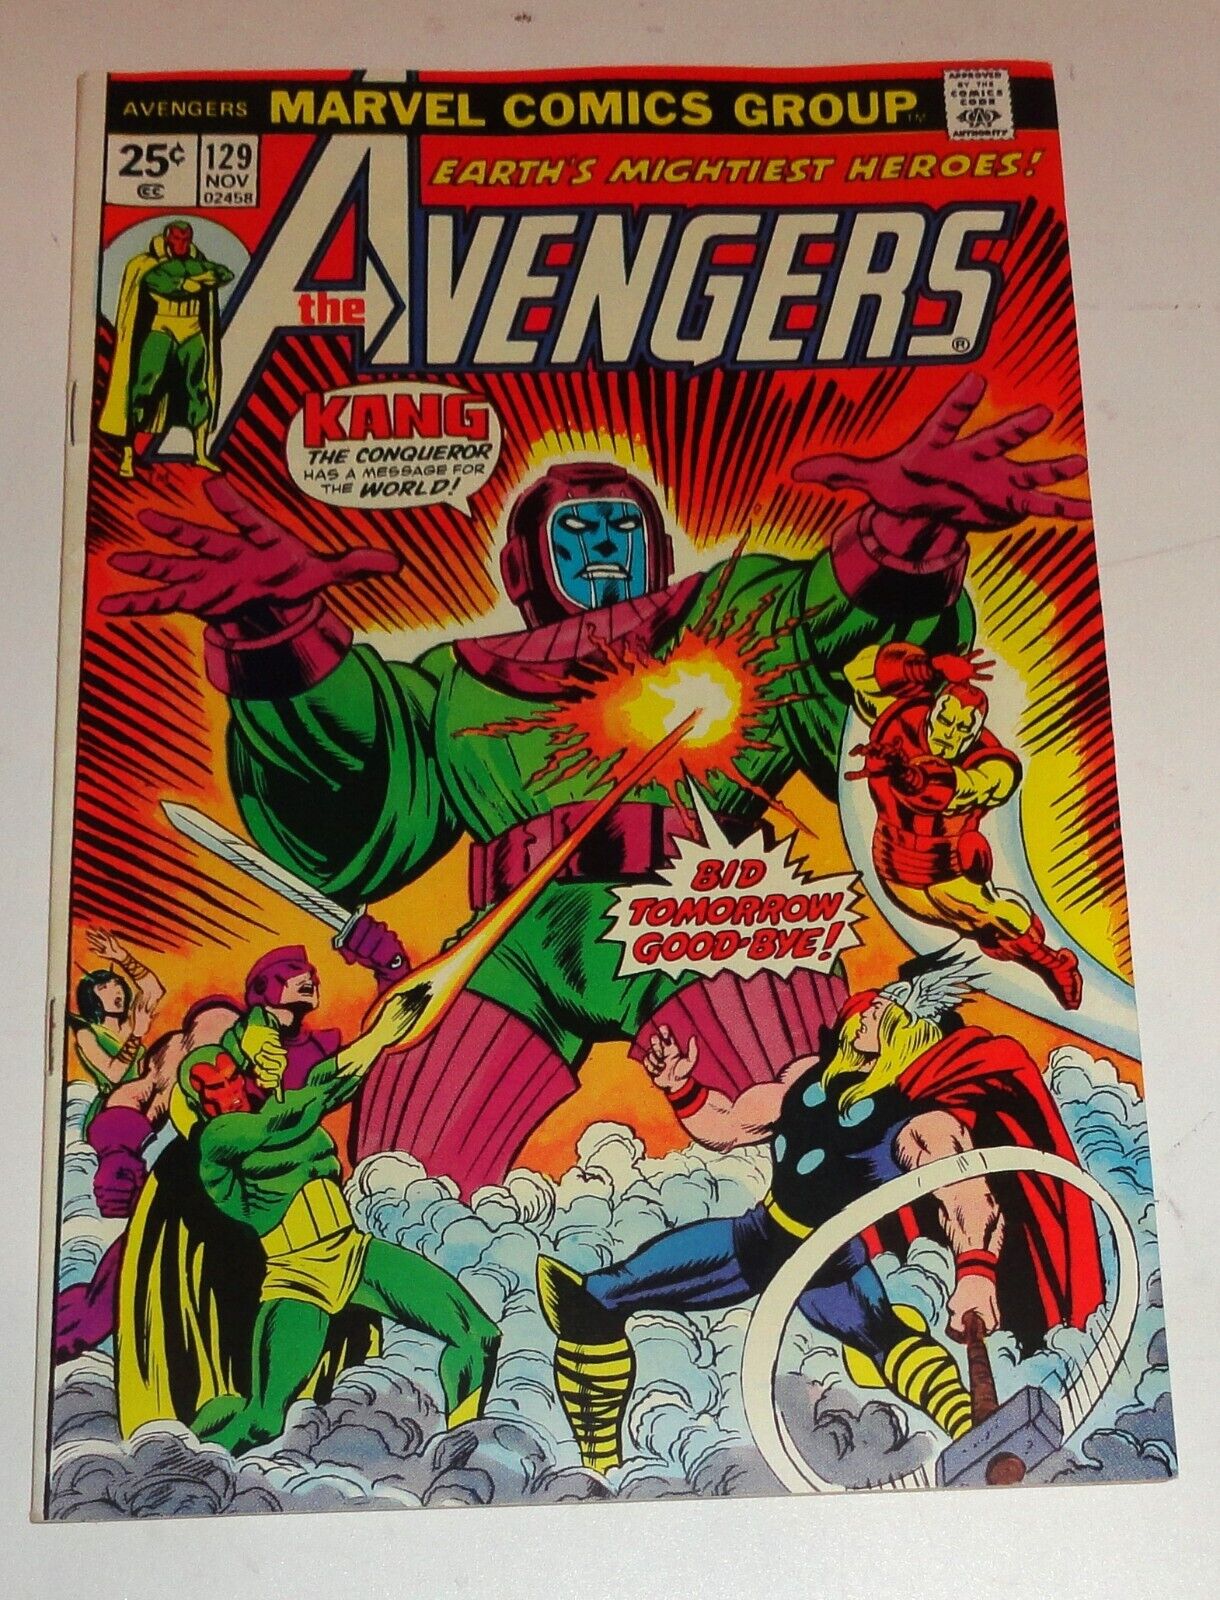 AVENGERS #129 GLOSSY 9.0 CLASSIC KANG COVER 1974